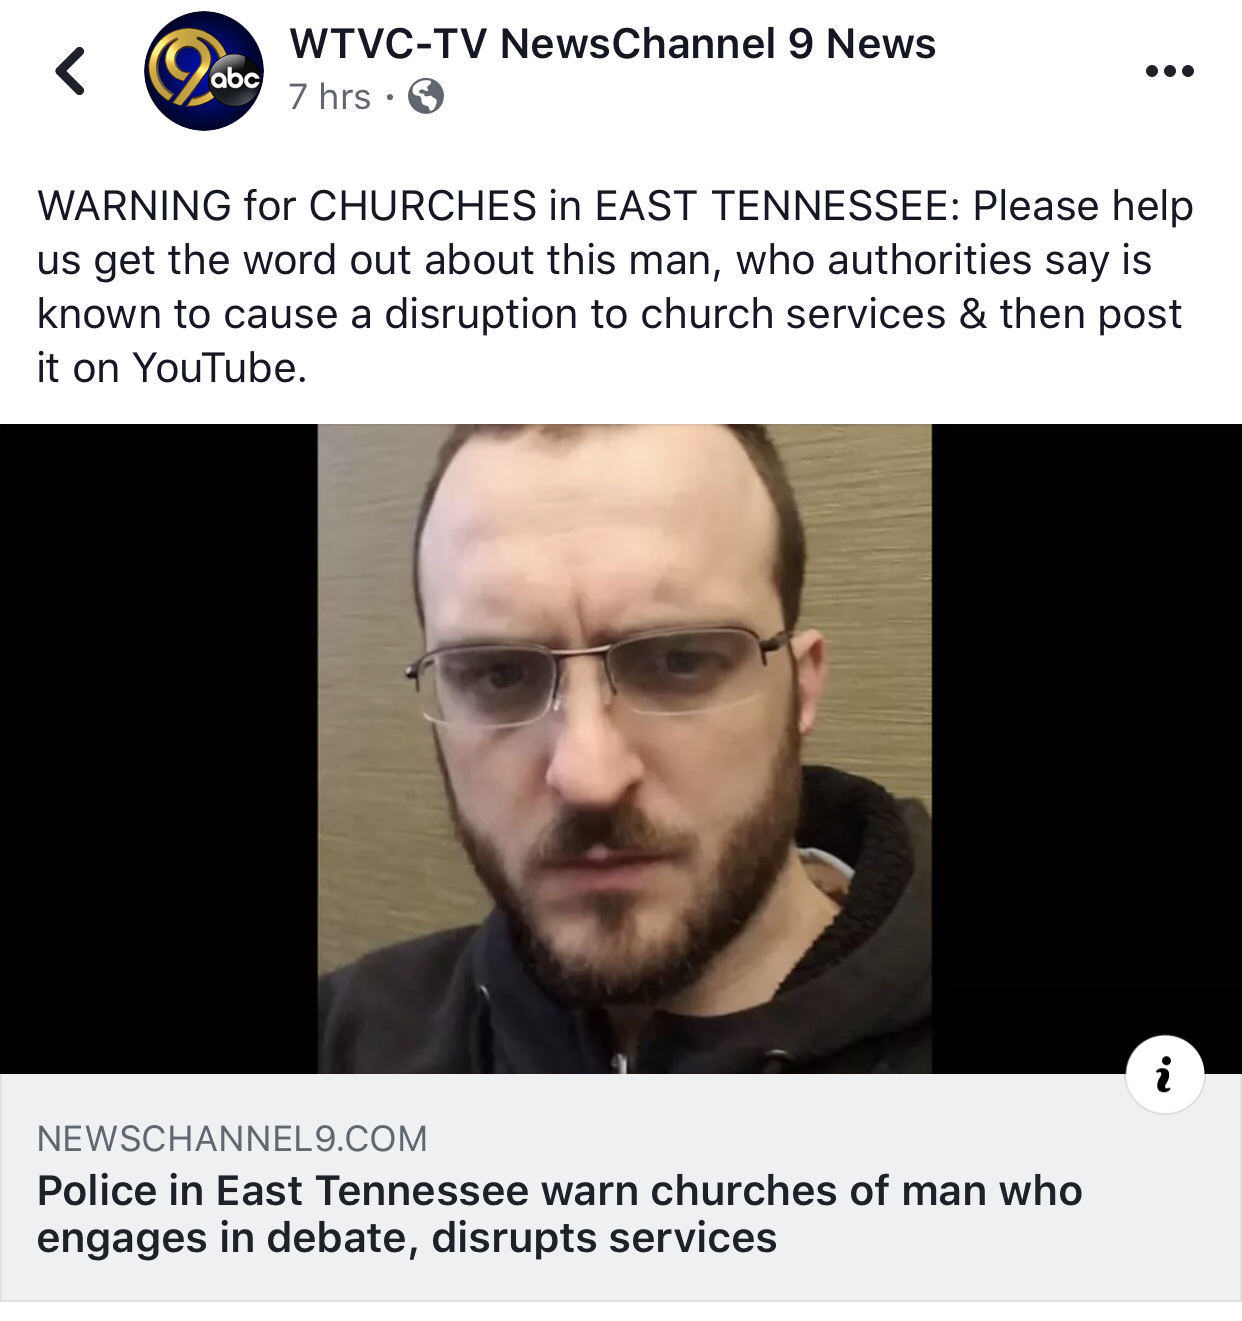 chris pratt gadsden flag - WtvcTv News Channel 9 News abc 7 hrs. Warning for Churches in East Tennessee Please help us get the word out about this man, who authorities say is known to cause a disruption to church services & then post it on YouTube Newscha